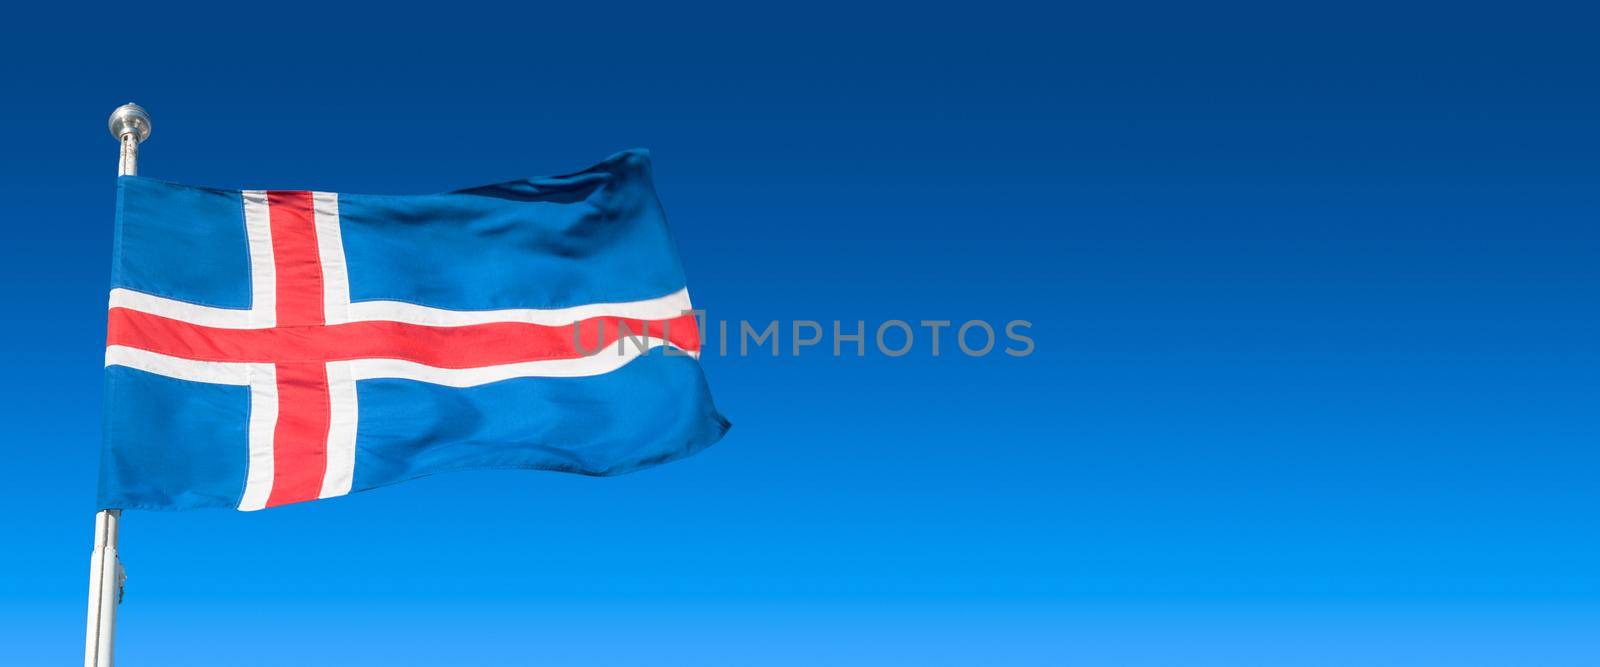 Banner with blue Icelandic national civil flag with red and white cross at blue sky background with copy space for text